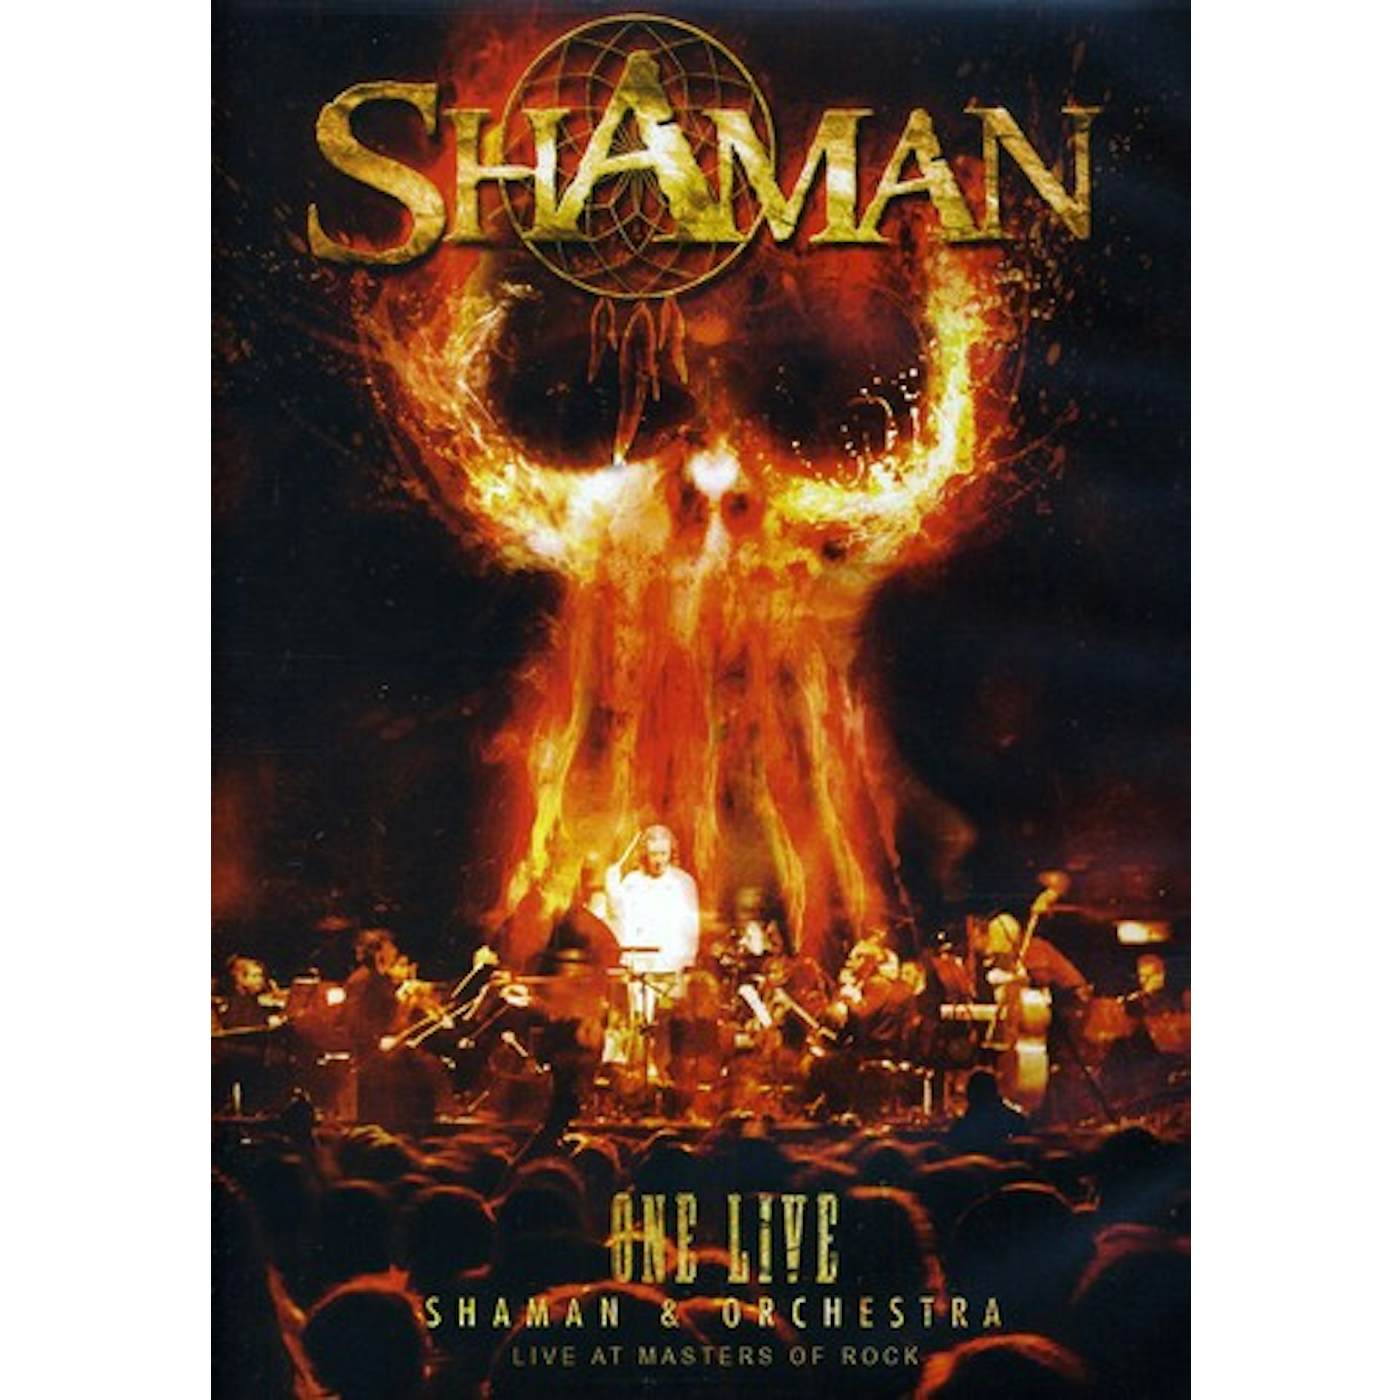 ONE LIVE - SHAMAN & ORCHESTRA DVD